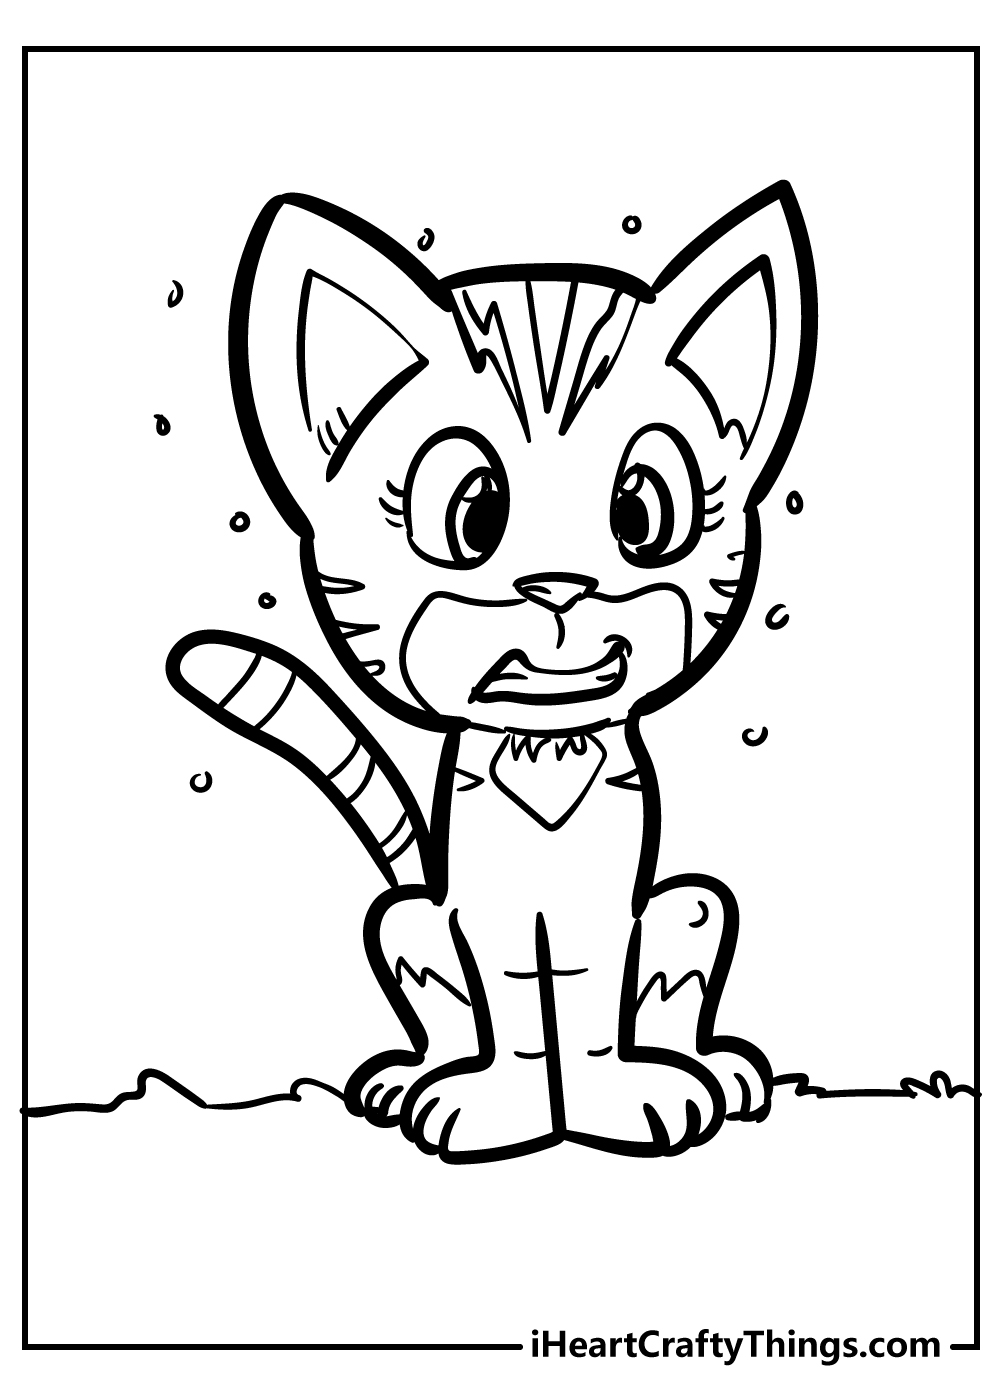 cat pj masks coloring pages free download